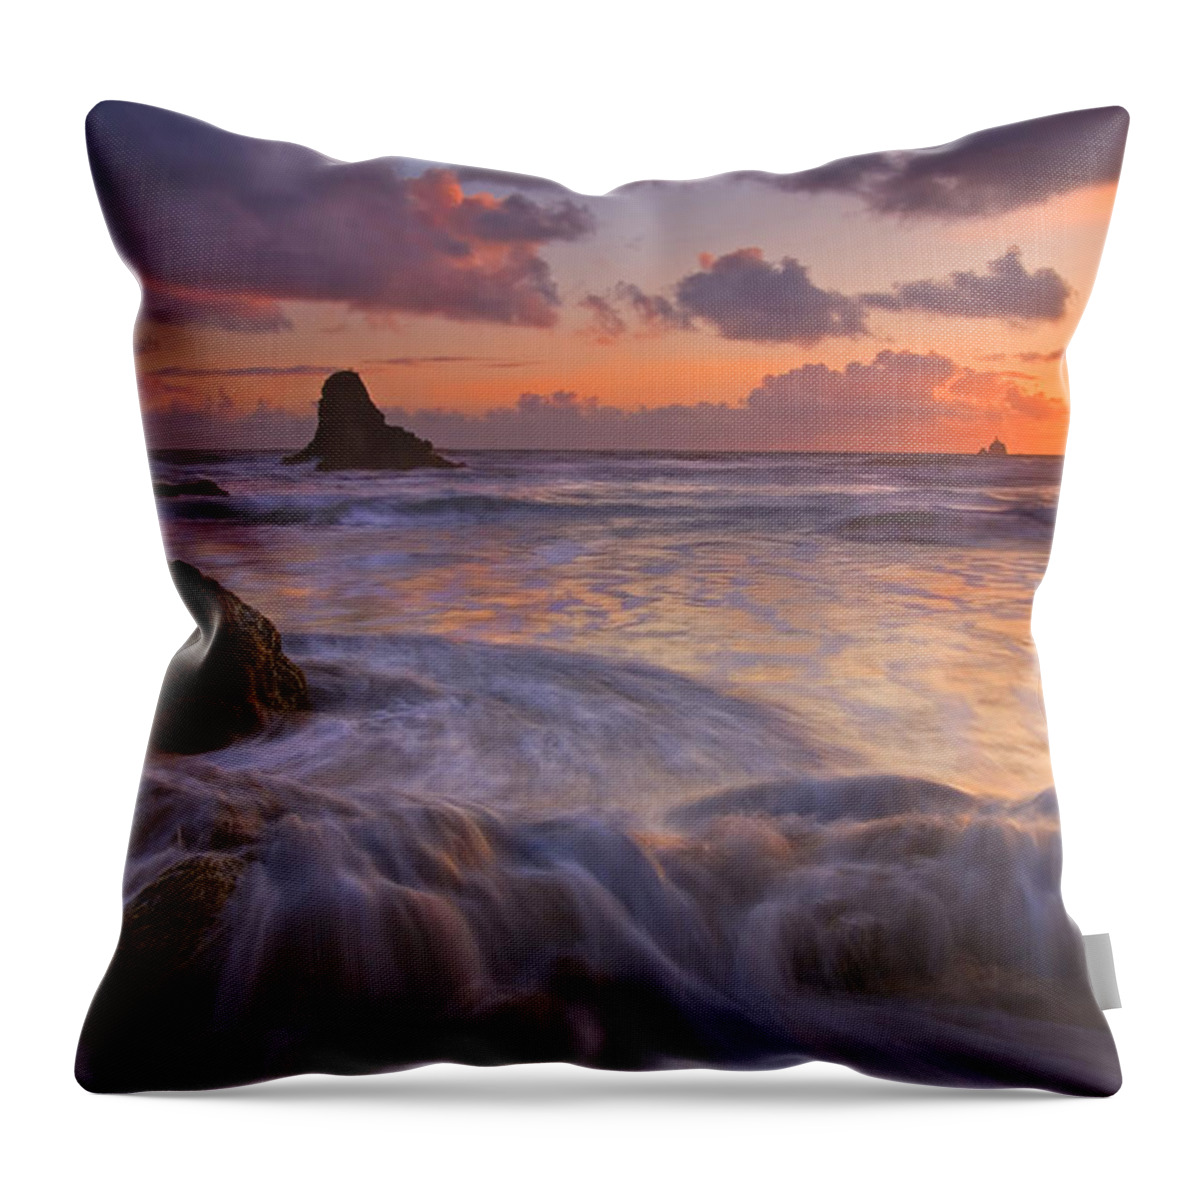 Sunset Throw Pillow featuring the photograph Overcome by Michael Dawson